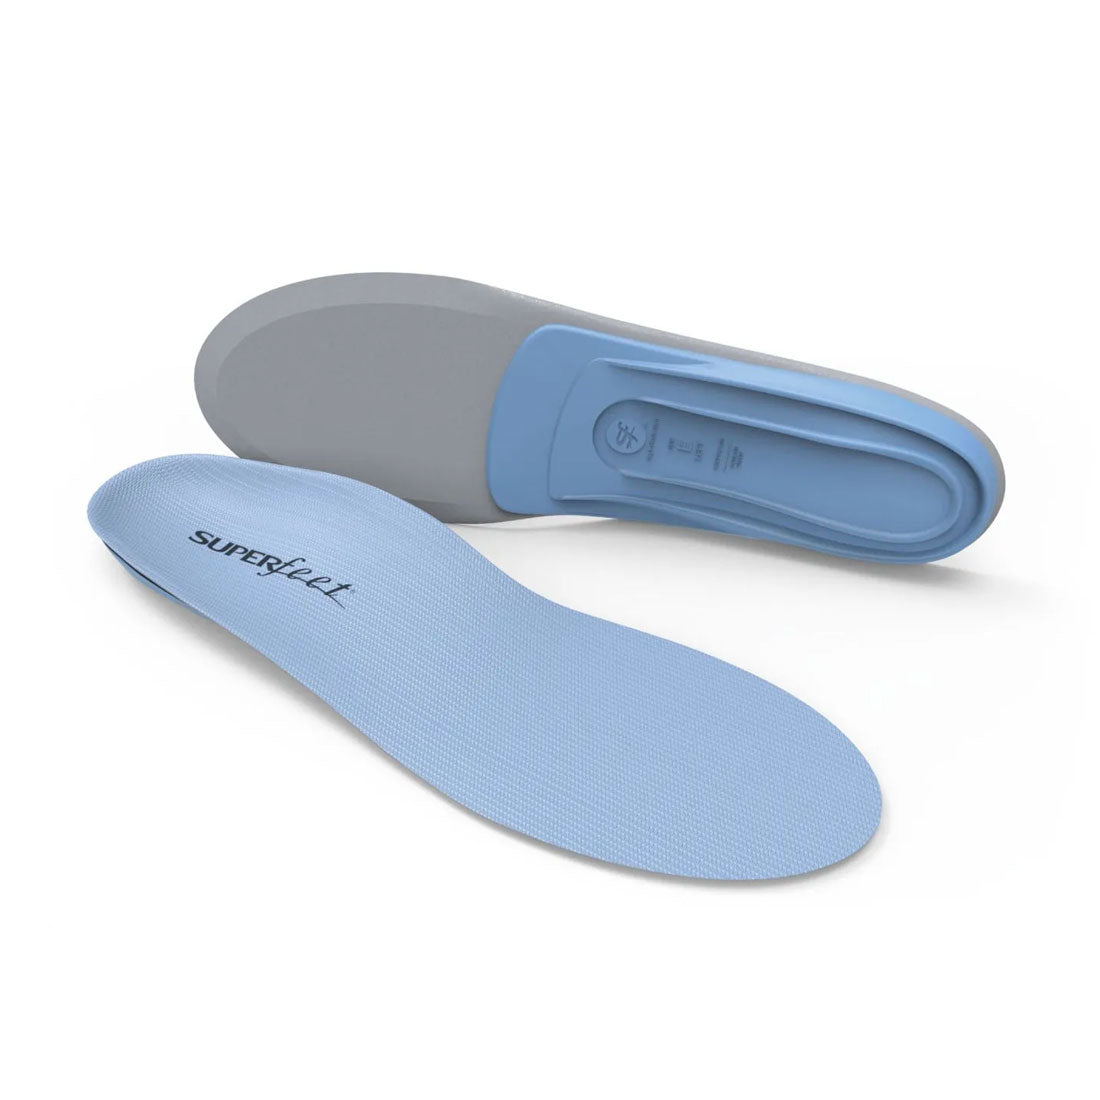 Insole Superfeet Blue - Sz B Insoles and Fitting Aids